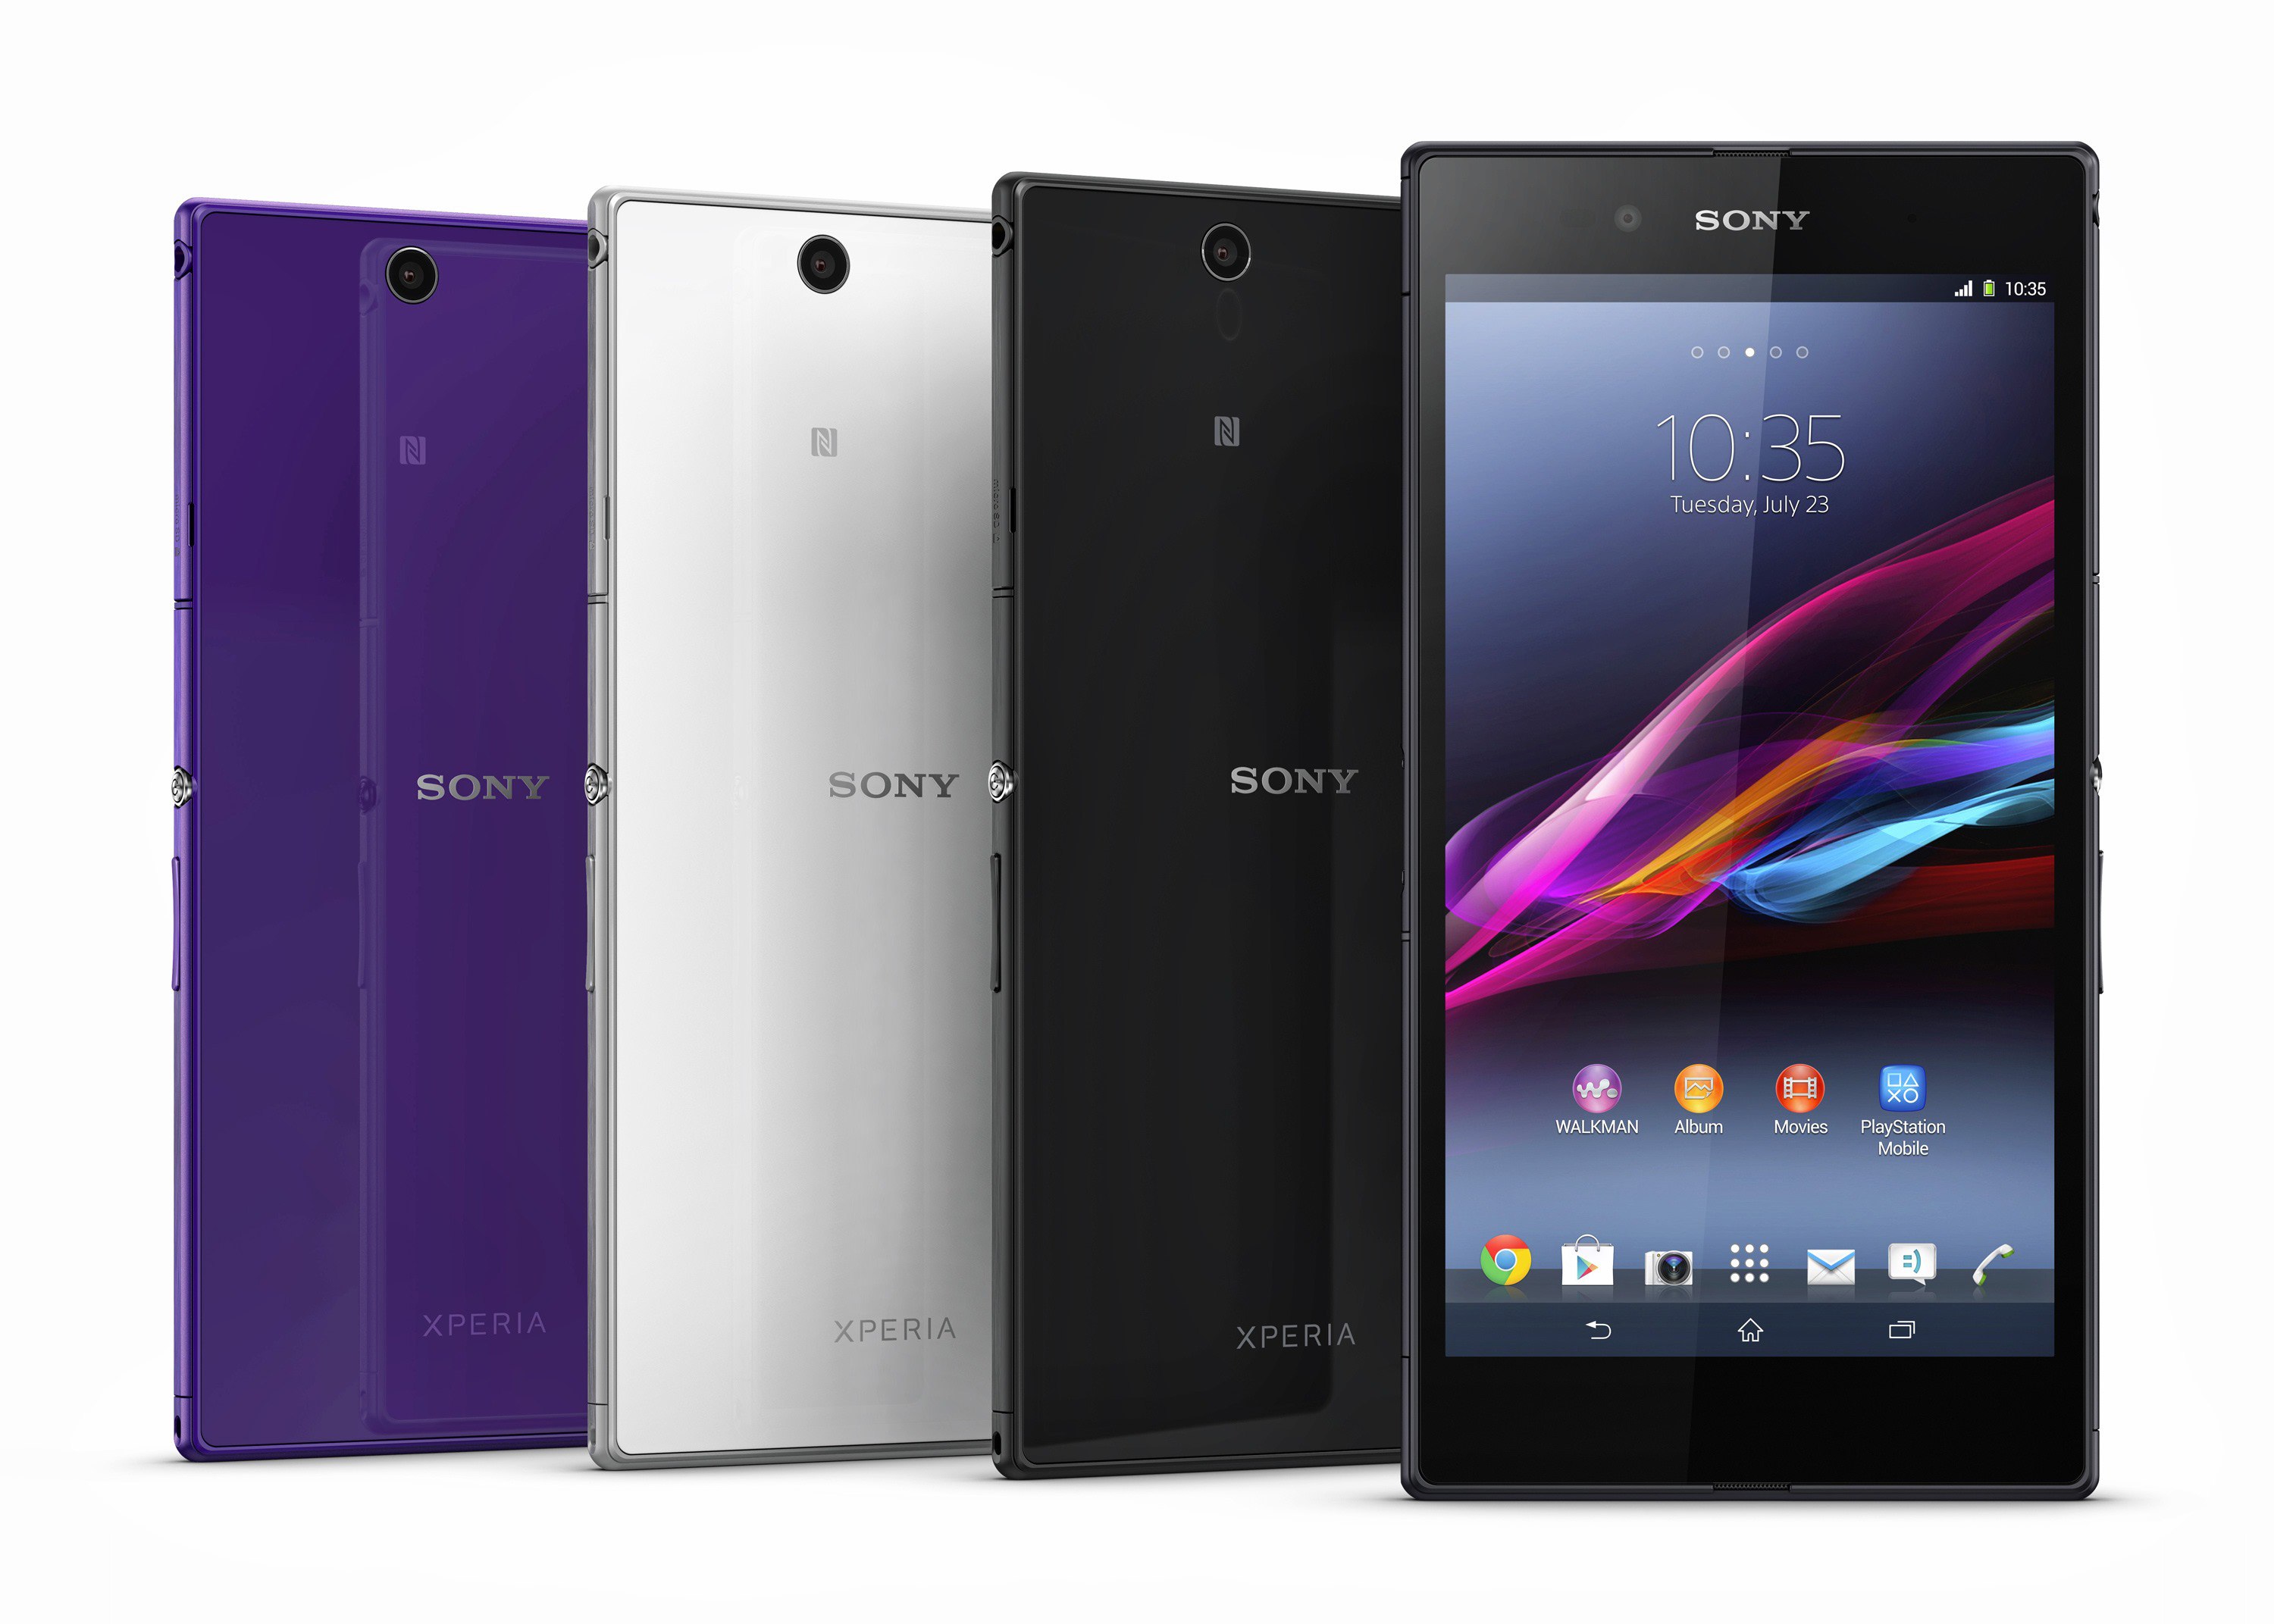 How to Flash a Custom ROM on the Sony Xperia Z Ultra